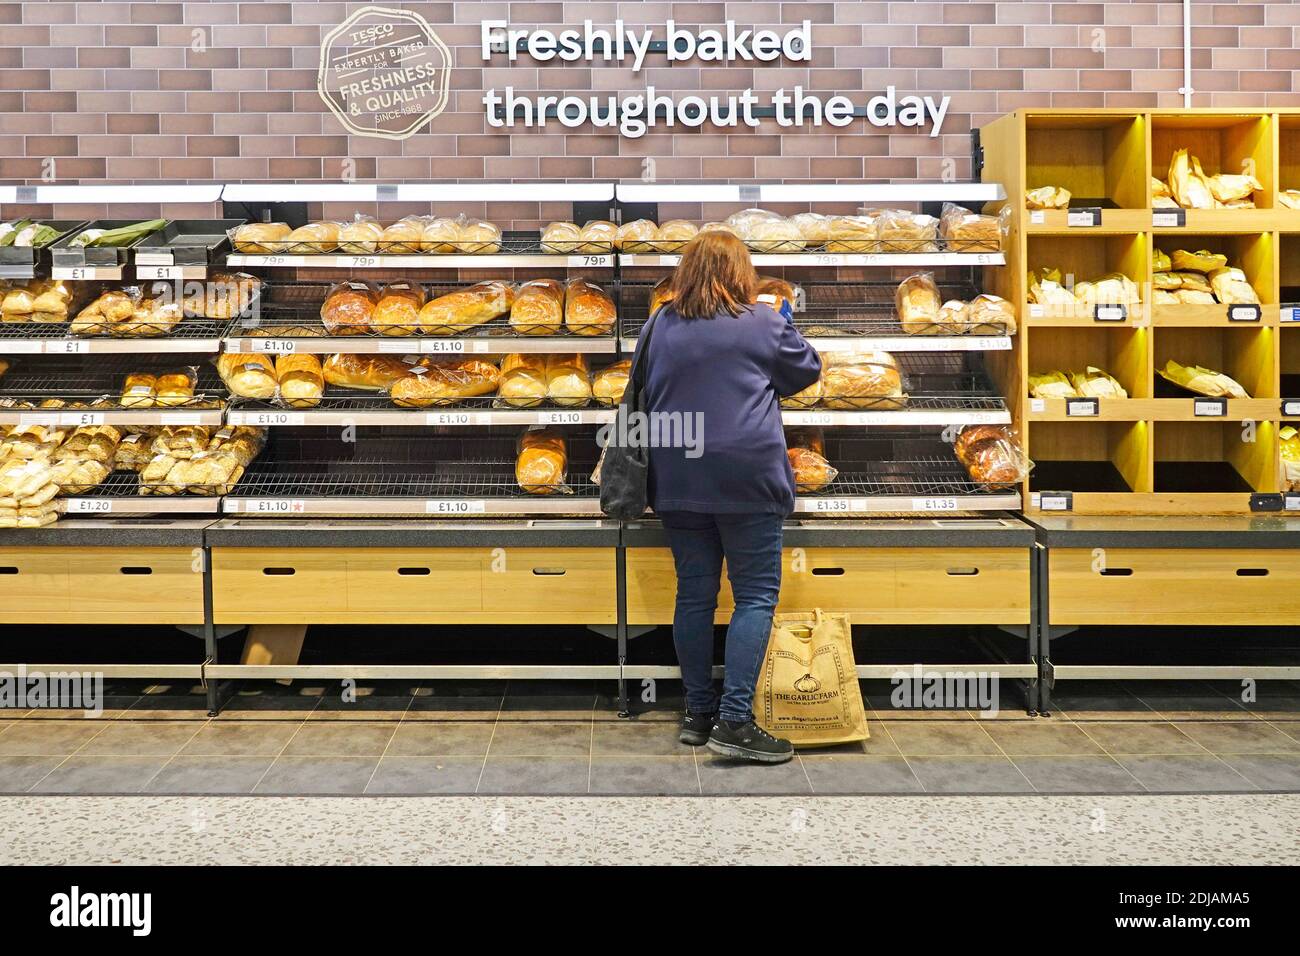 Back view of customer shopping for bread at Tesco supermarket in store bakery selection shelves below sign for freshly baked all day London England UK Stock Photo